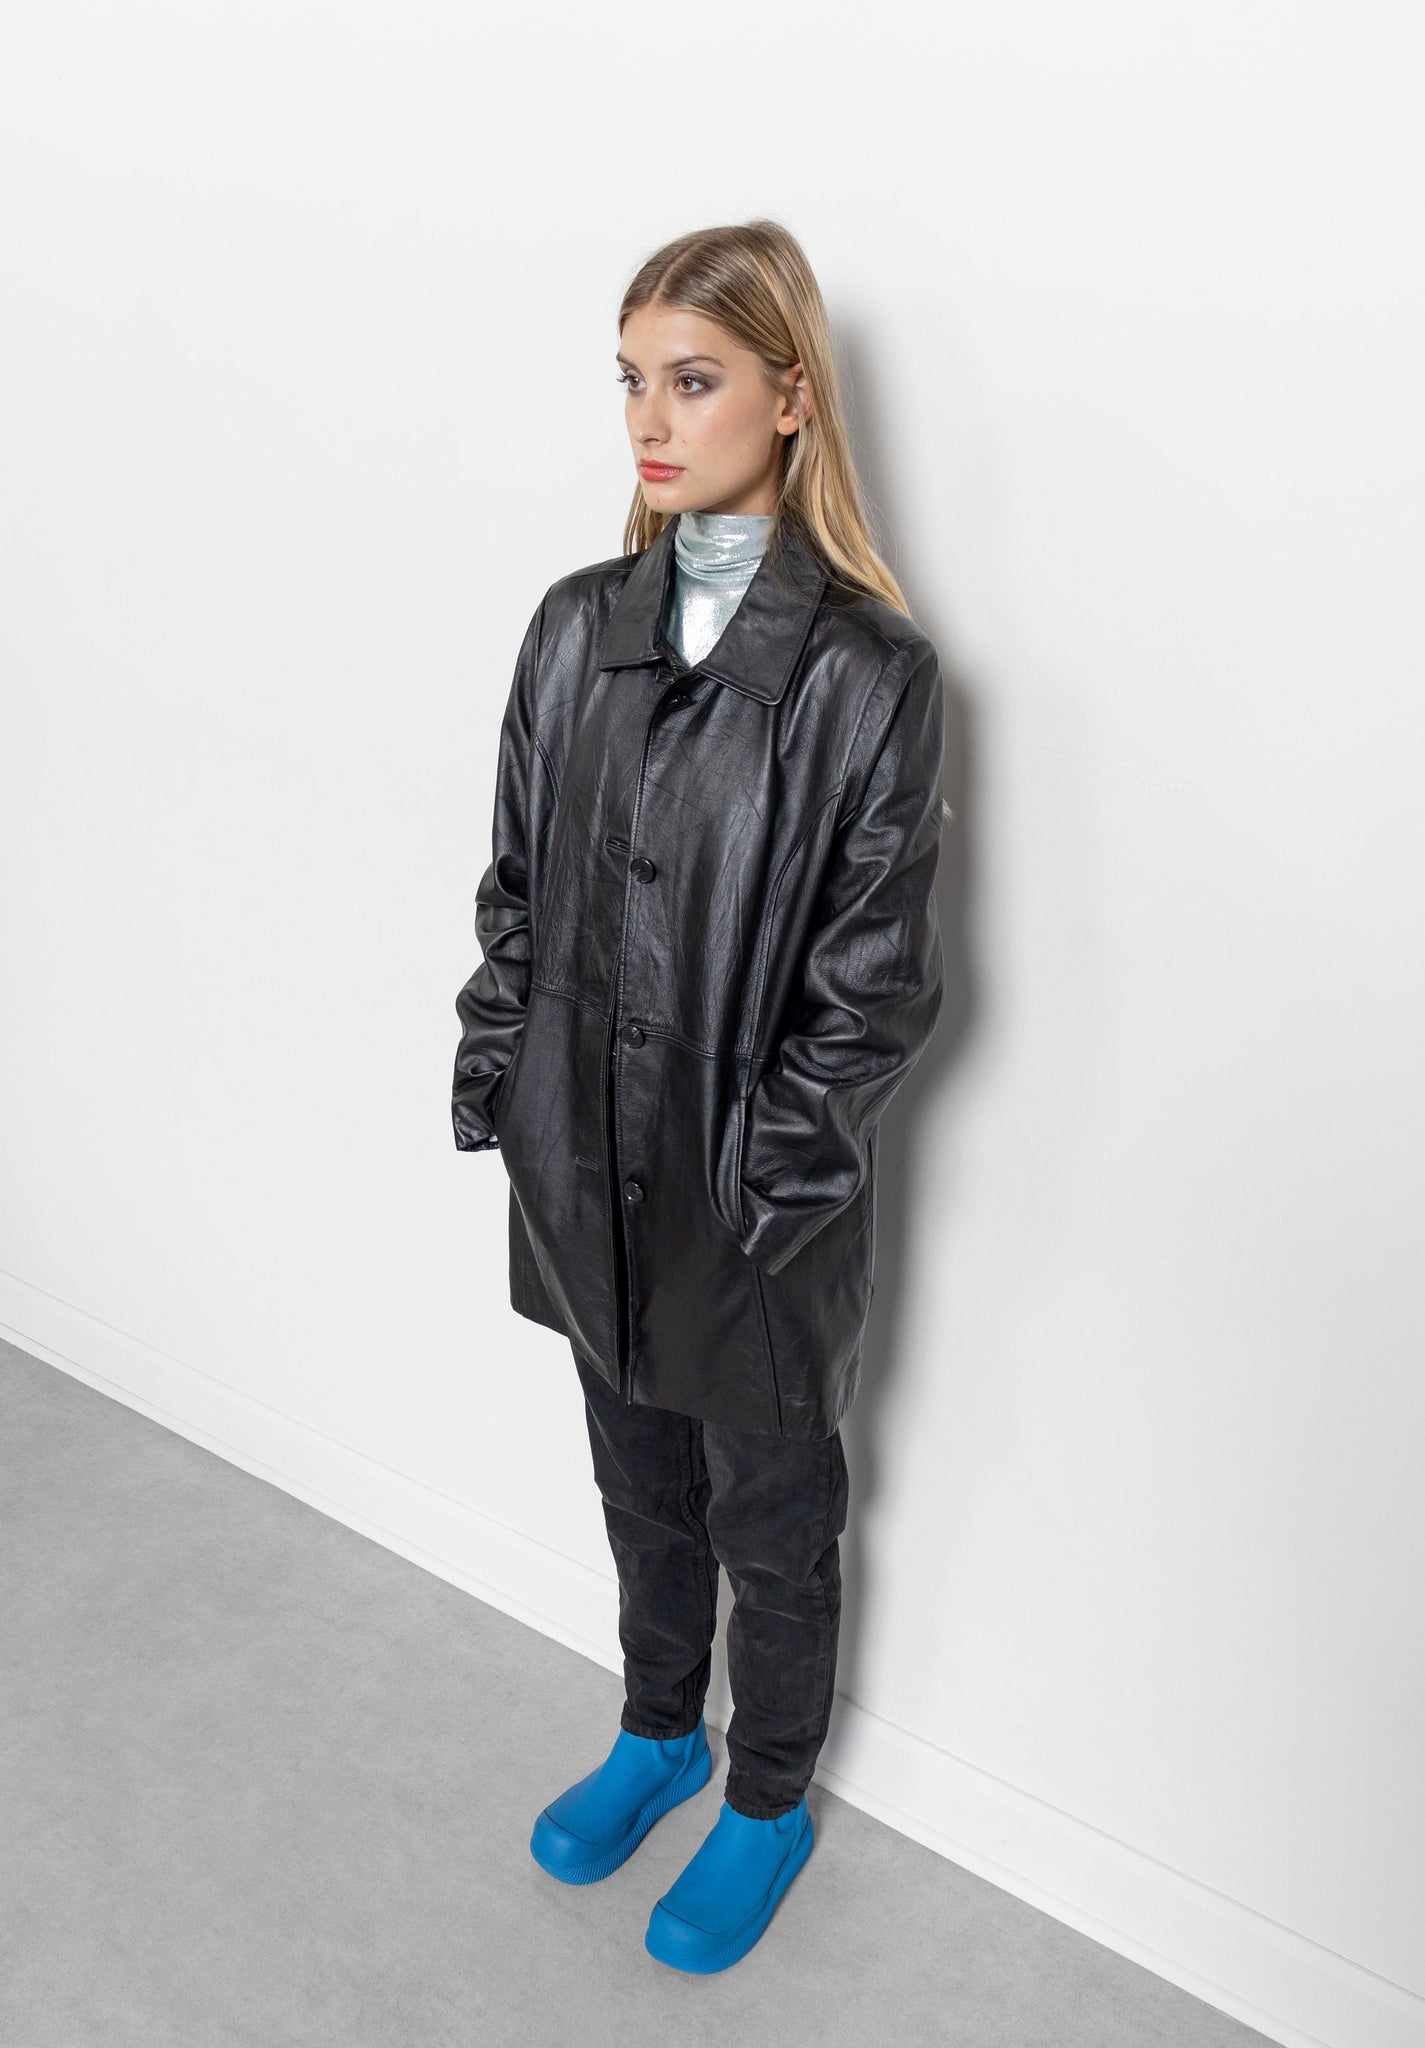 Leather Trench